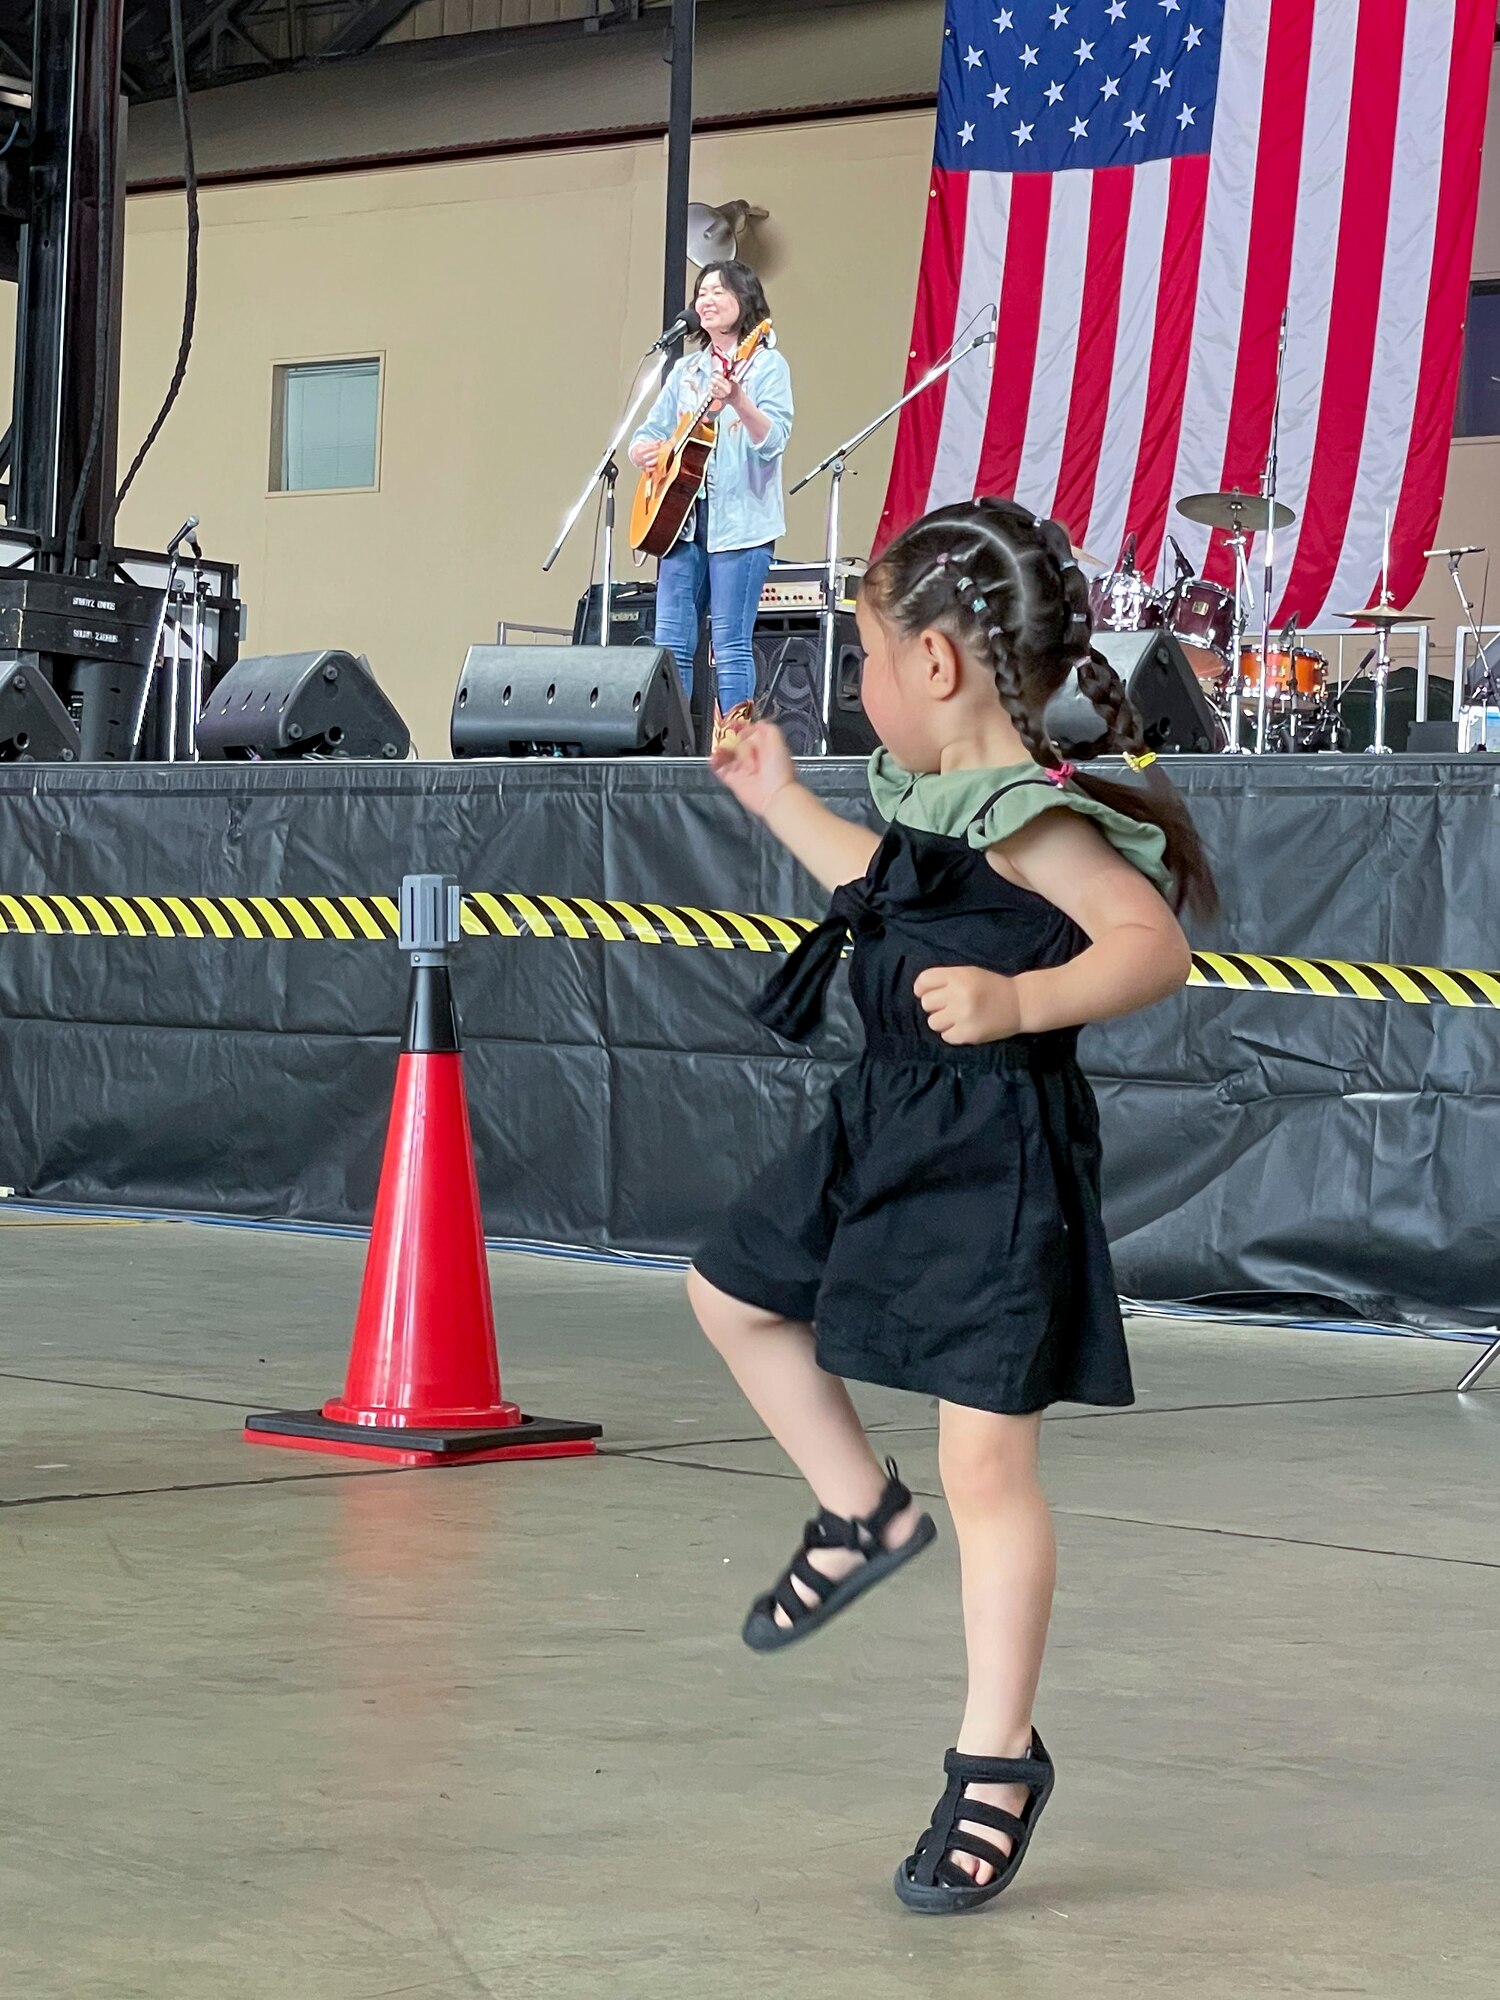 A Japanese country singer performs at the main stage while a young festival attendee dances during Friendship Festival 2022, at Yokota Air Base, Japan, May 22, 2022. The two-day festival was an opportunity for visitors to learn more about the U.S. and Japan bilateral partnership, while strengthening the bonds between Yokota and the local communities. Yokota was able to host the event with the support of Japan Self-Defense Force, sister services and the local community. (U.S. Air Force photo by Staff Sgt. Ryan Lackey)